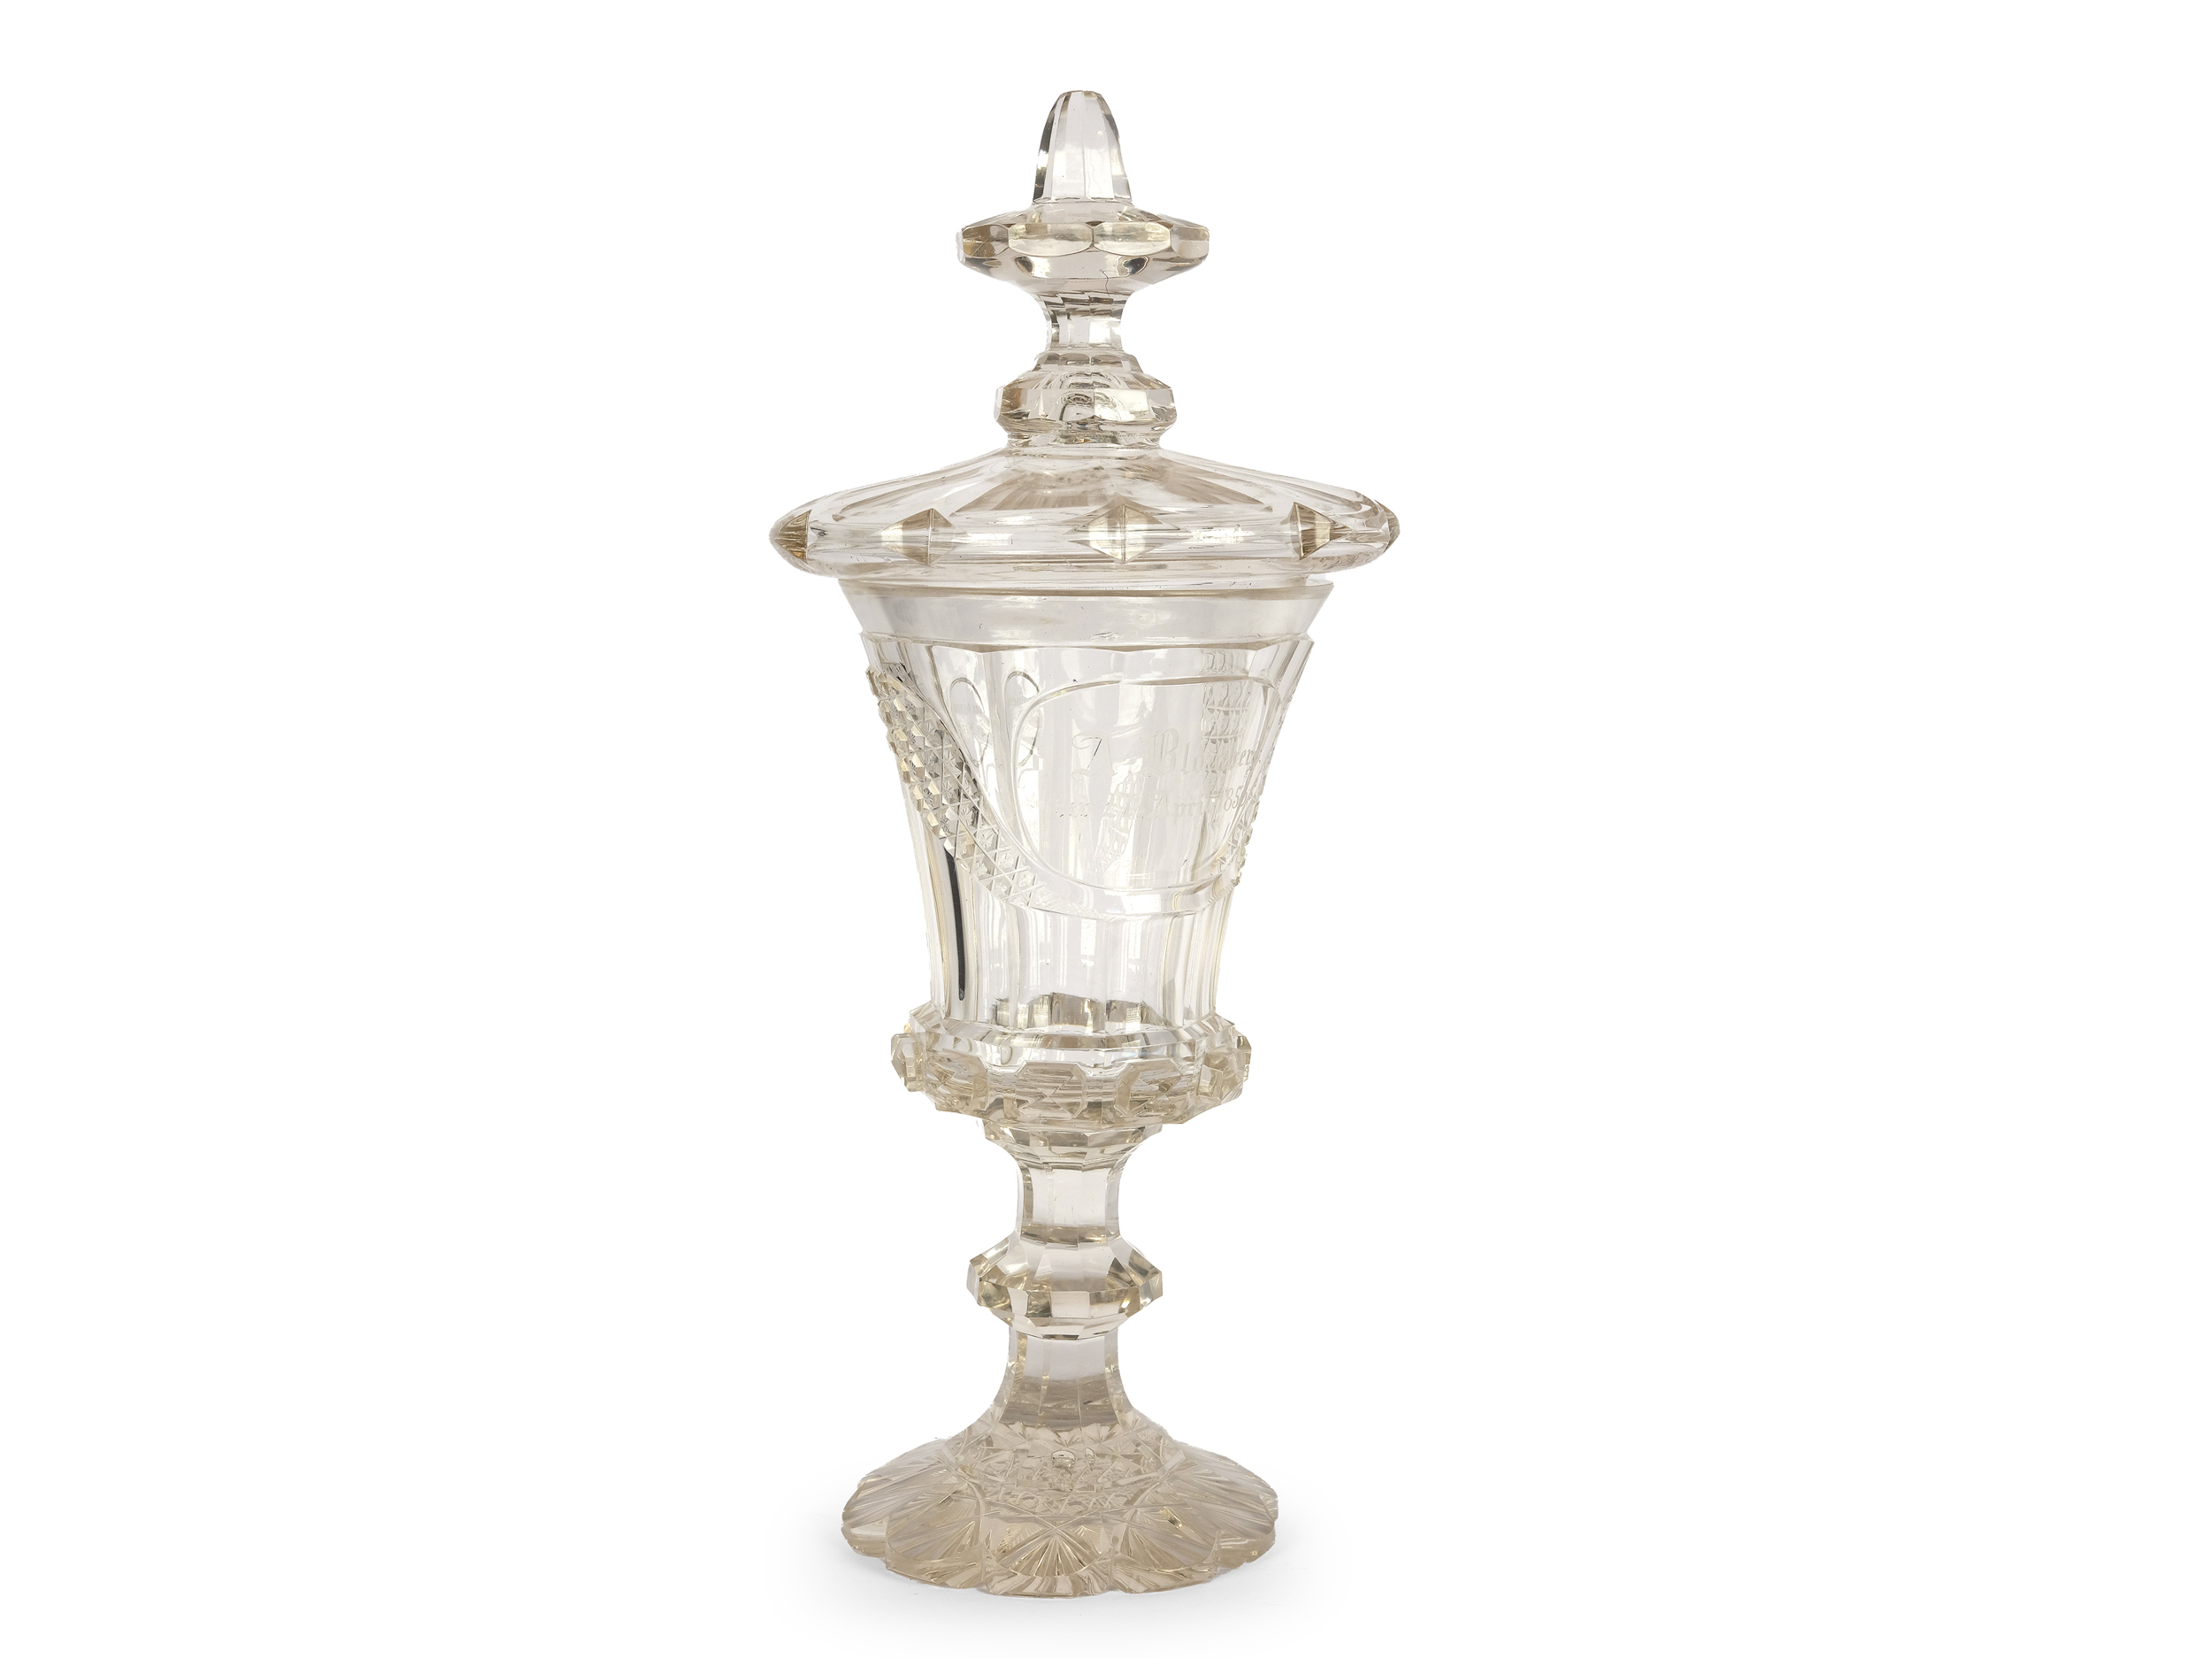 Lidded goblet, mid 19th century - Image 5 of 8